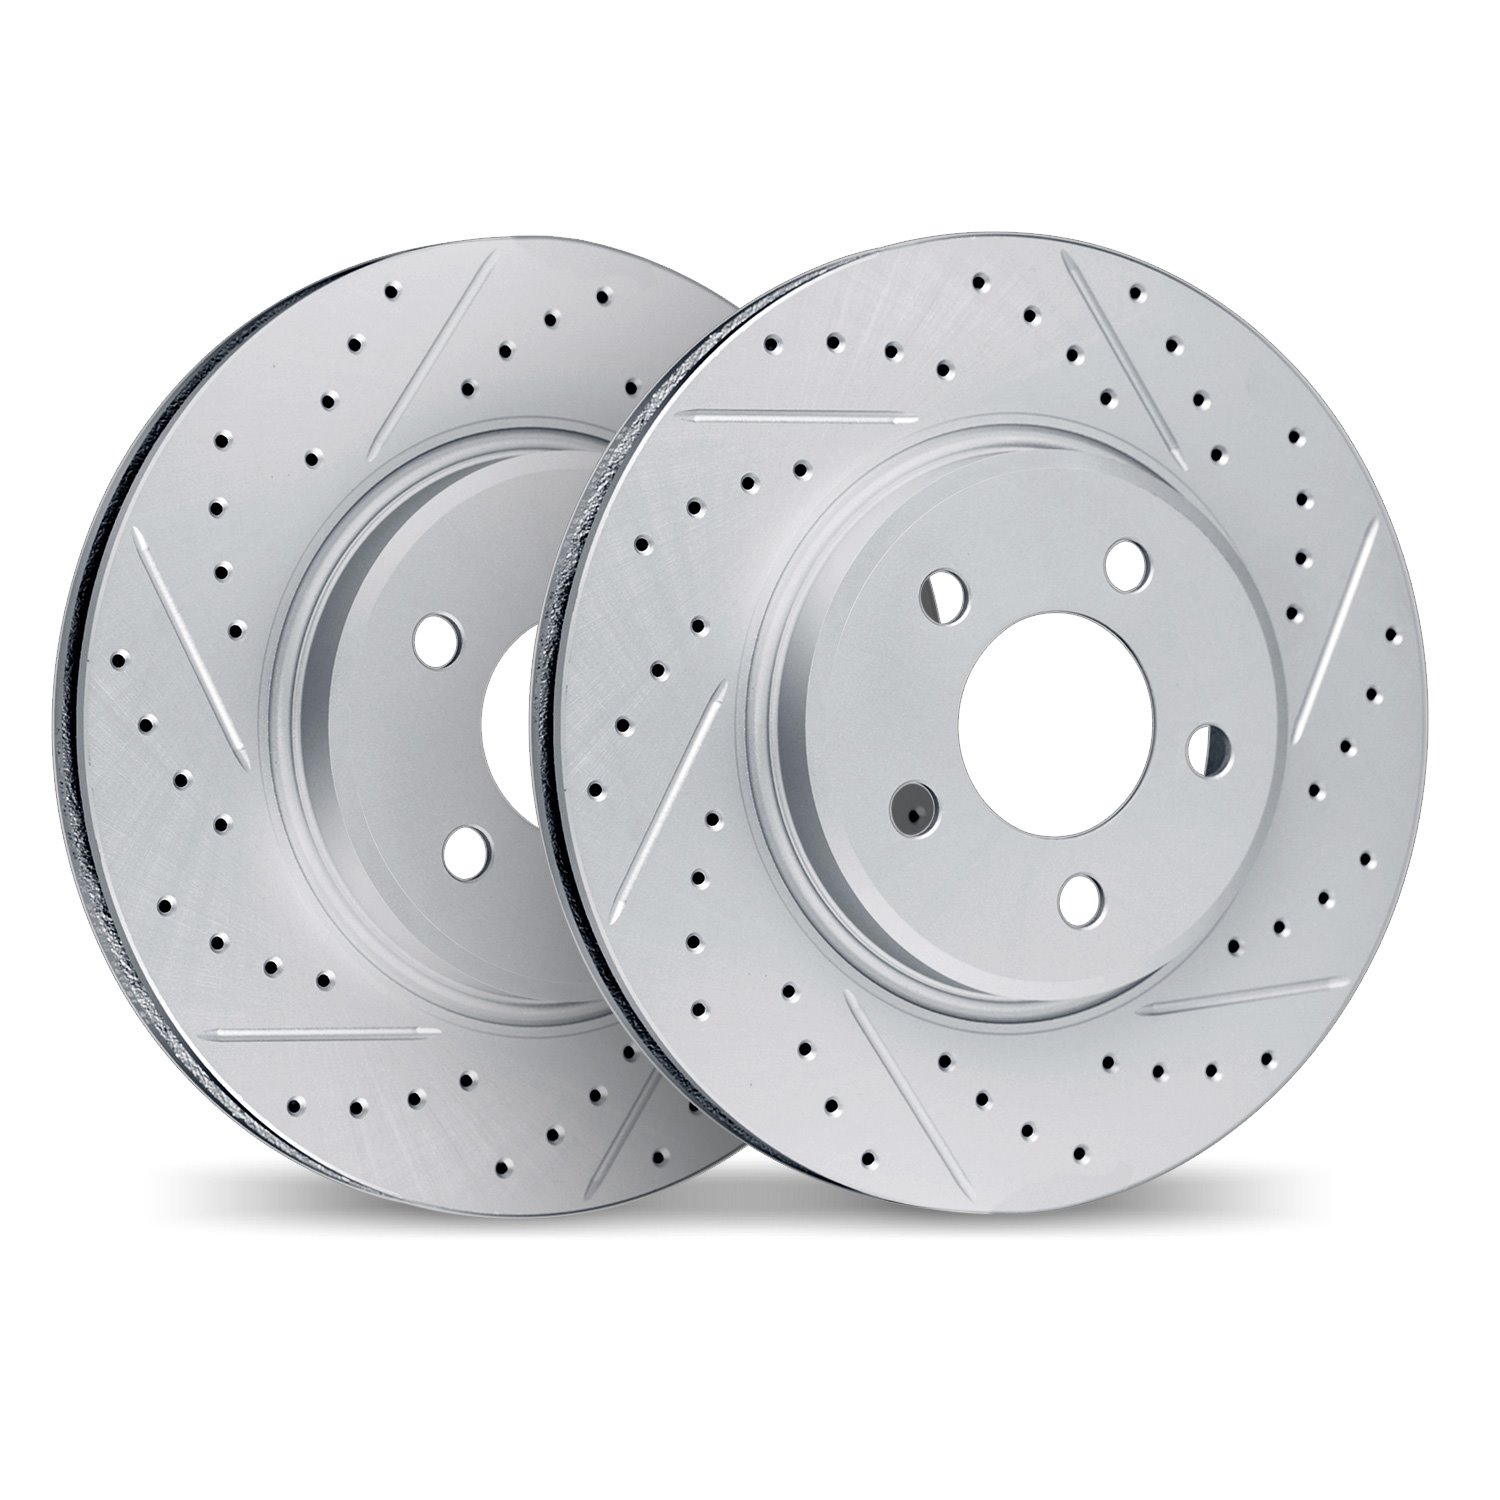 2002-48040 Geoperformance Drilled/Slotted Brake Rotors, 1997-2005 GM, Position: Rear